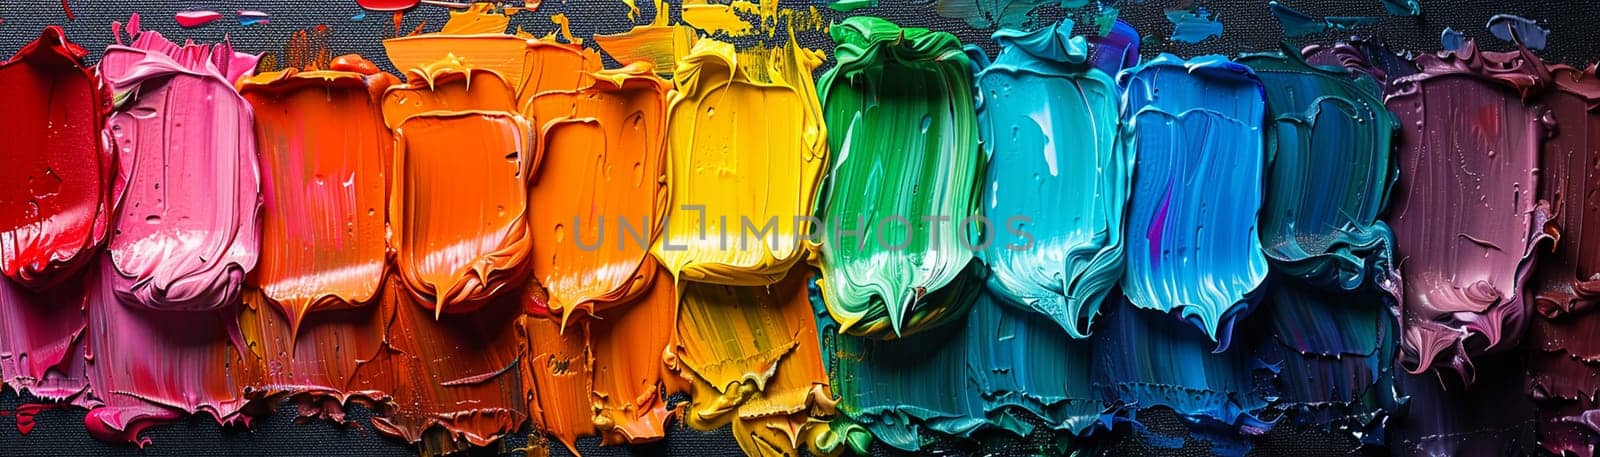 Painter's palette with vibrant colors, representing creativity and the art process